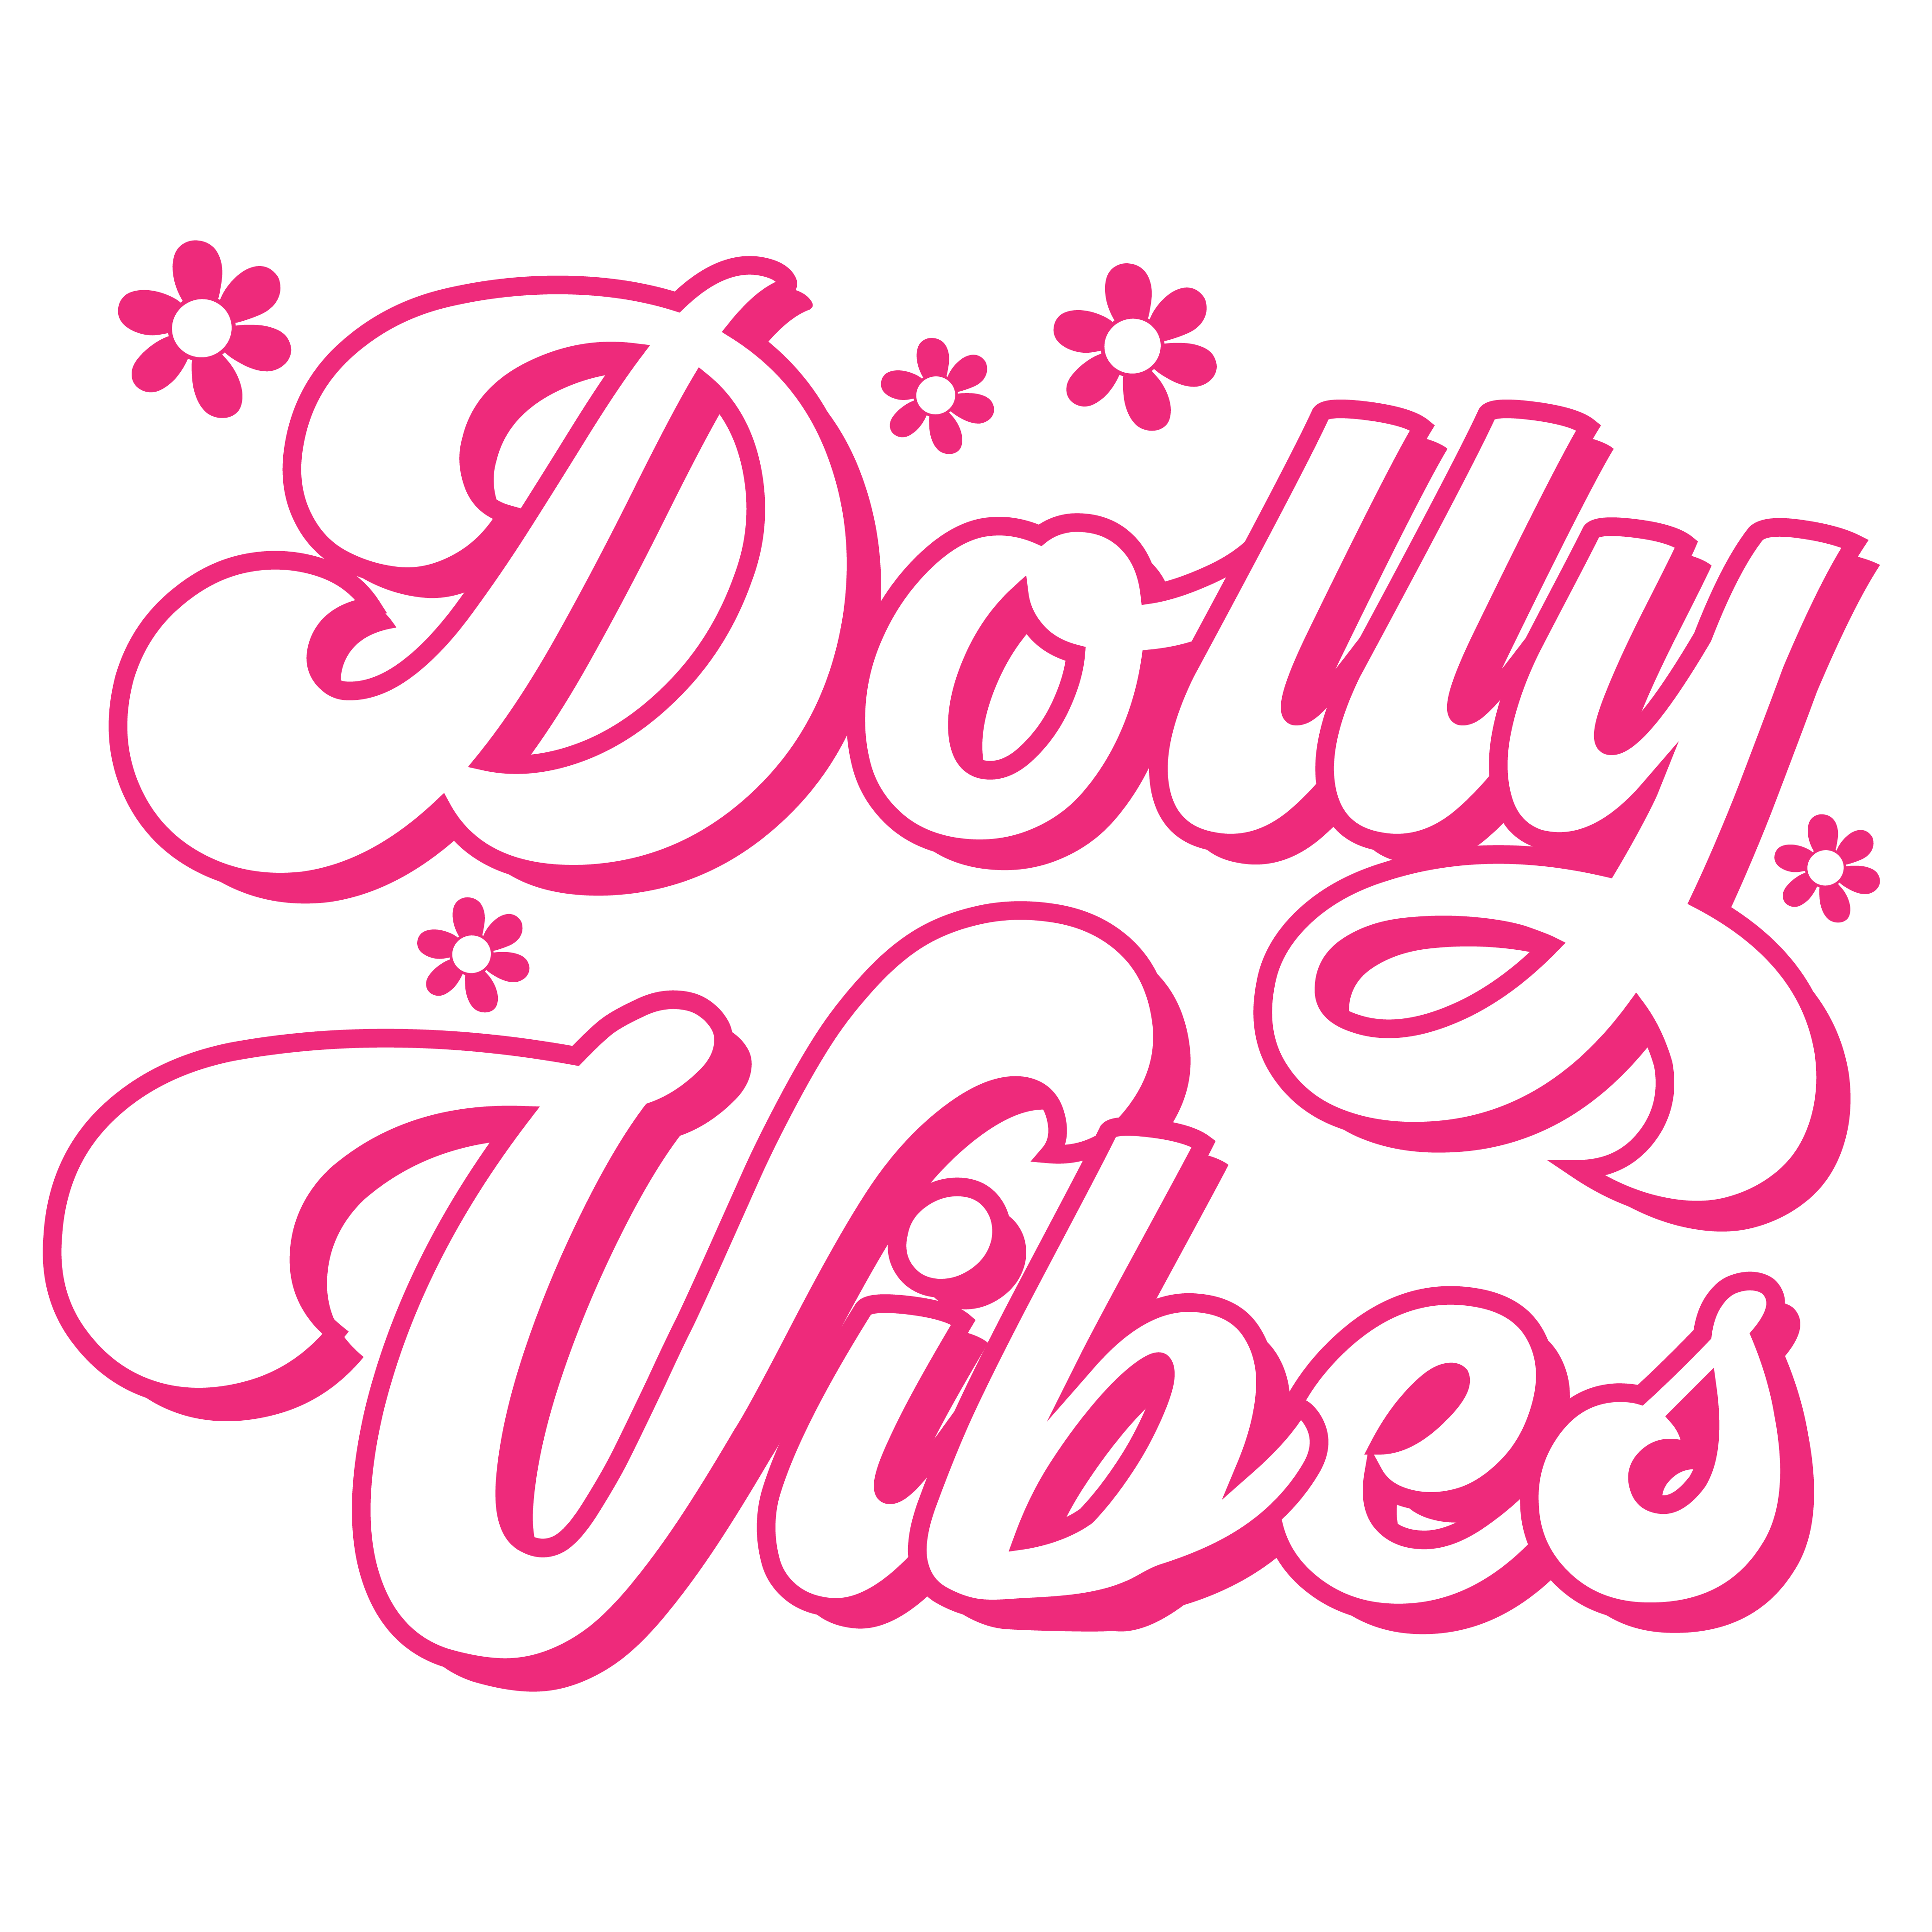 Dolly Vibes - STN - 154